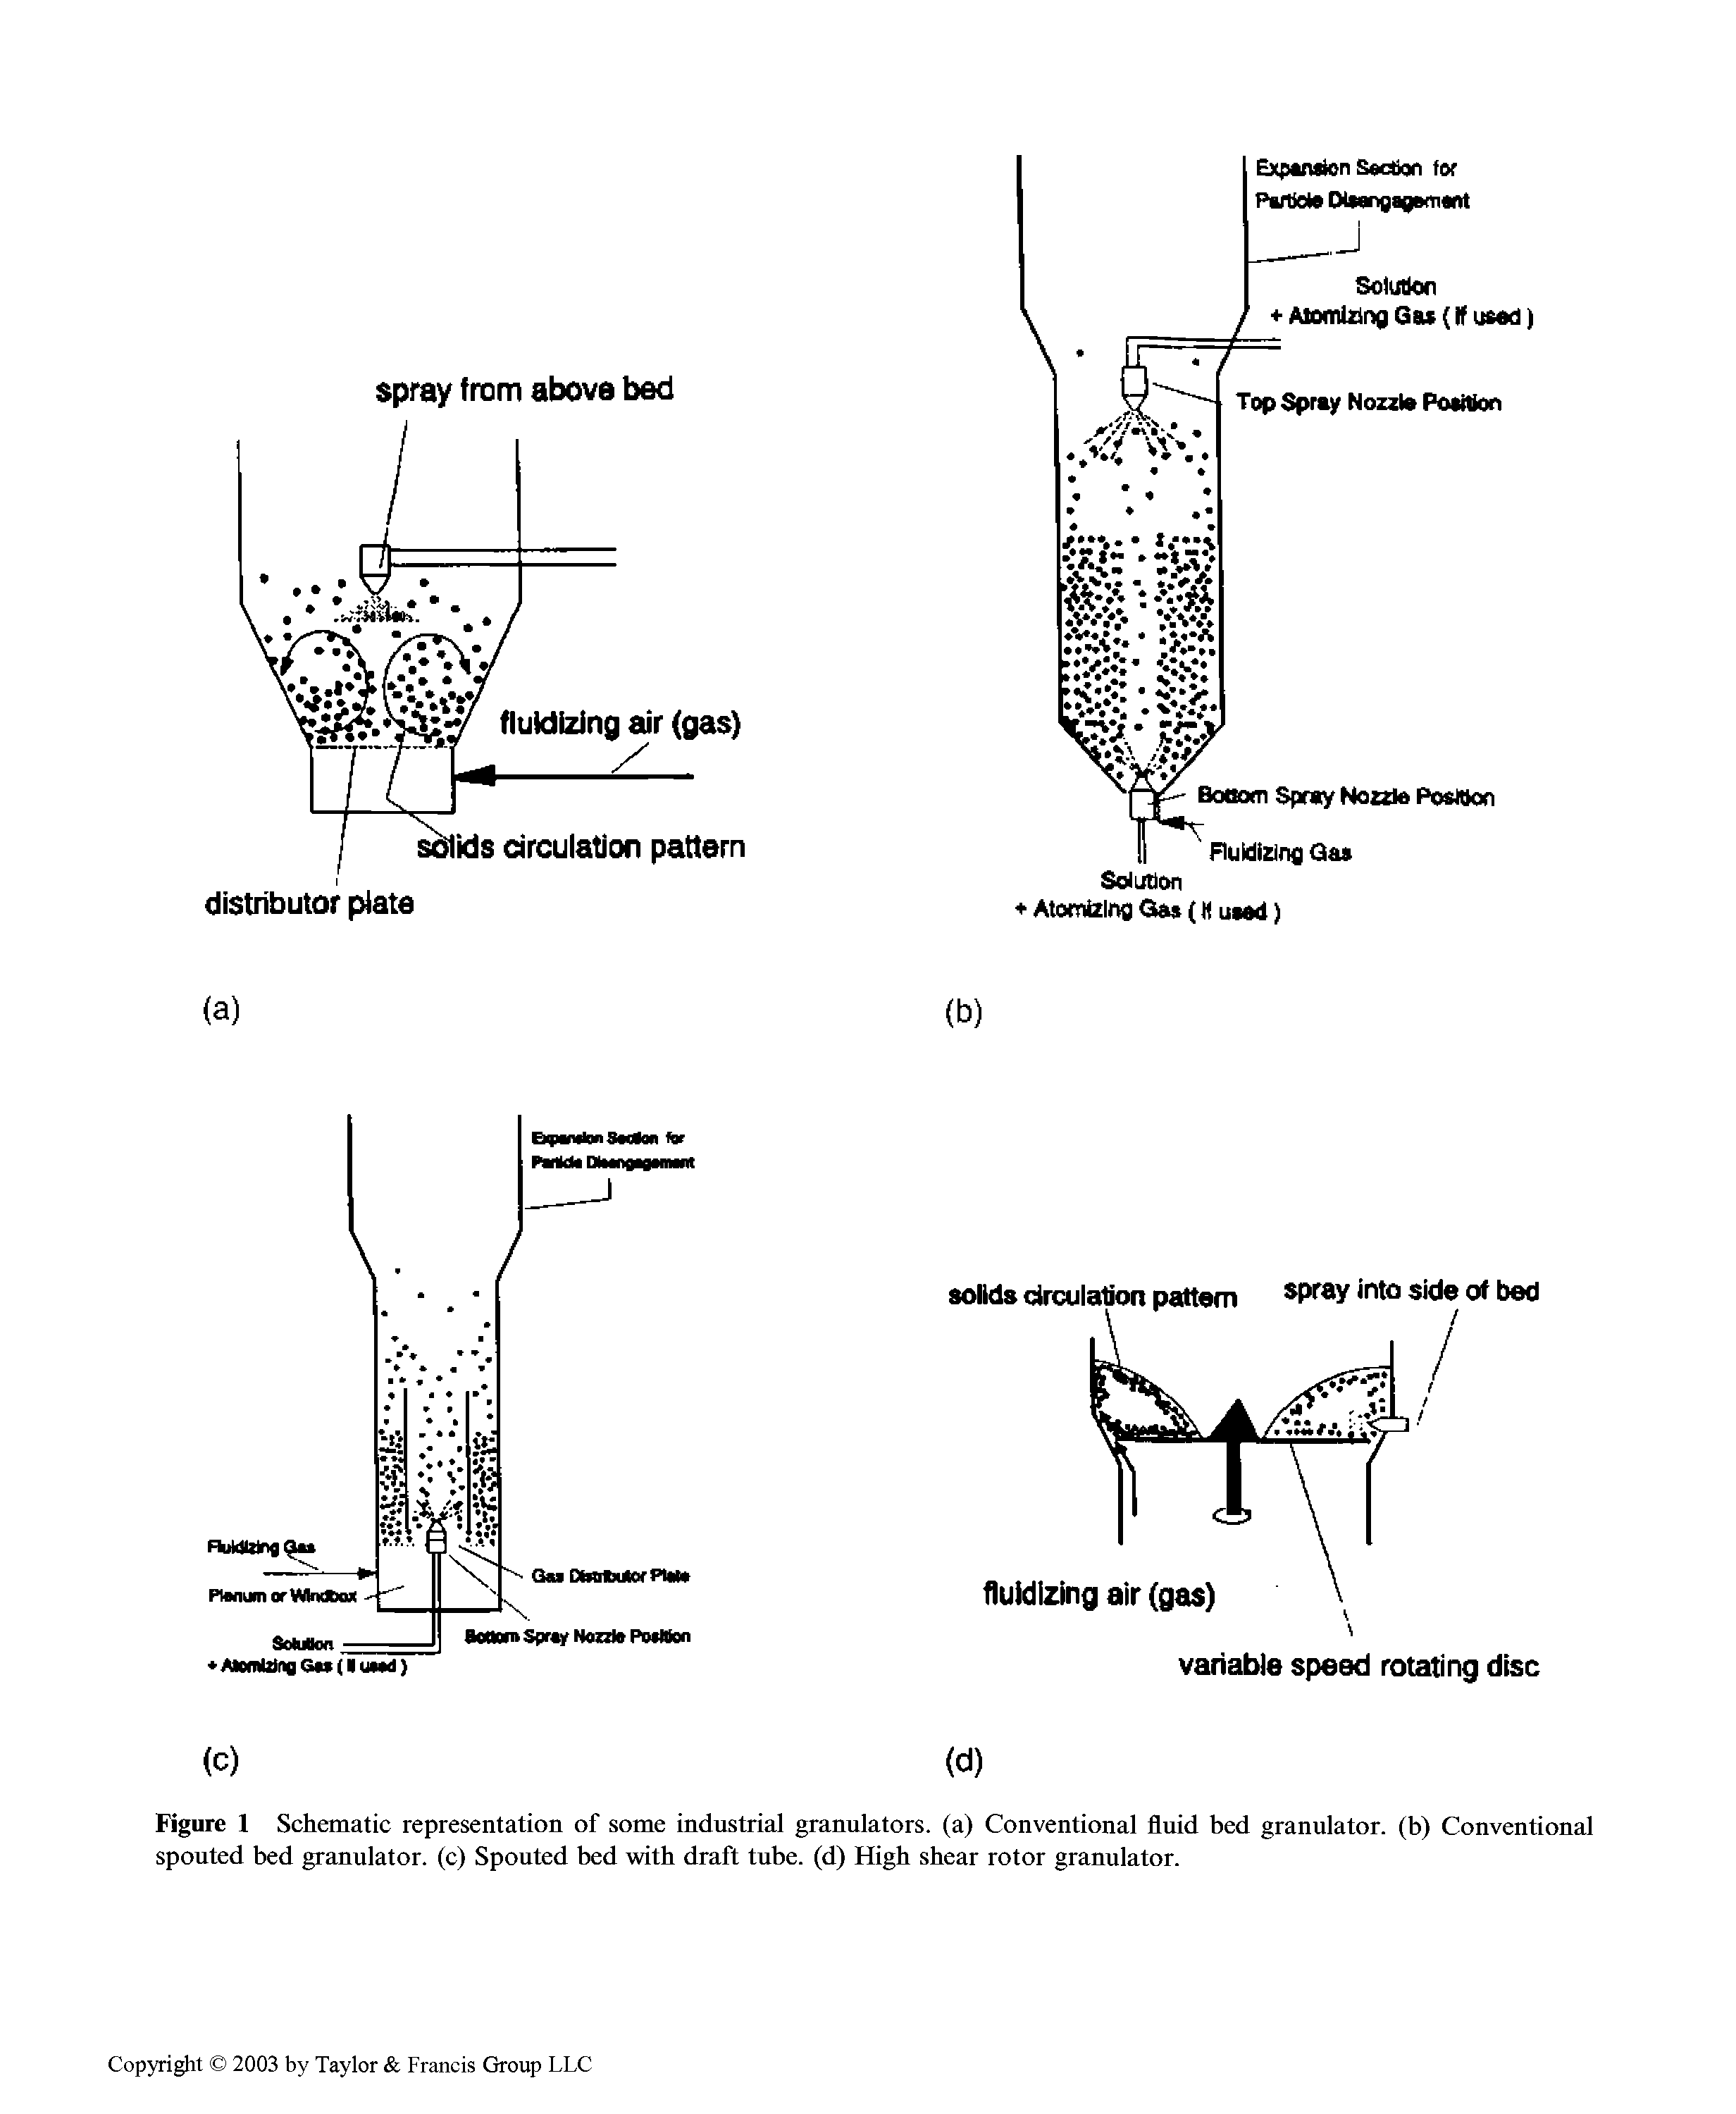 Figure 1 Schematic representation of some industrial granulators, (a) Conventional fluid bed granulator, (b) Conventional spouted bed granulator, (c) Spouted bed with draft tube, (d) High shear rotor granulator.